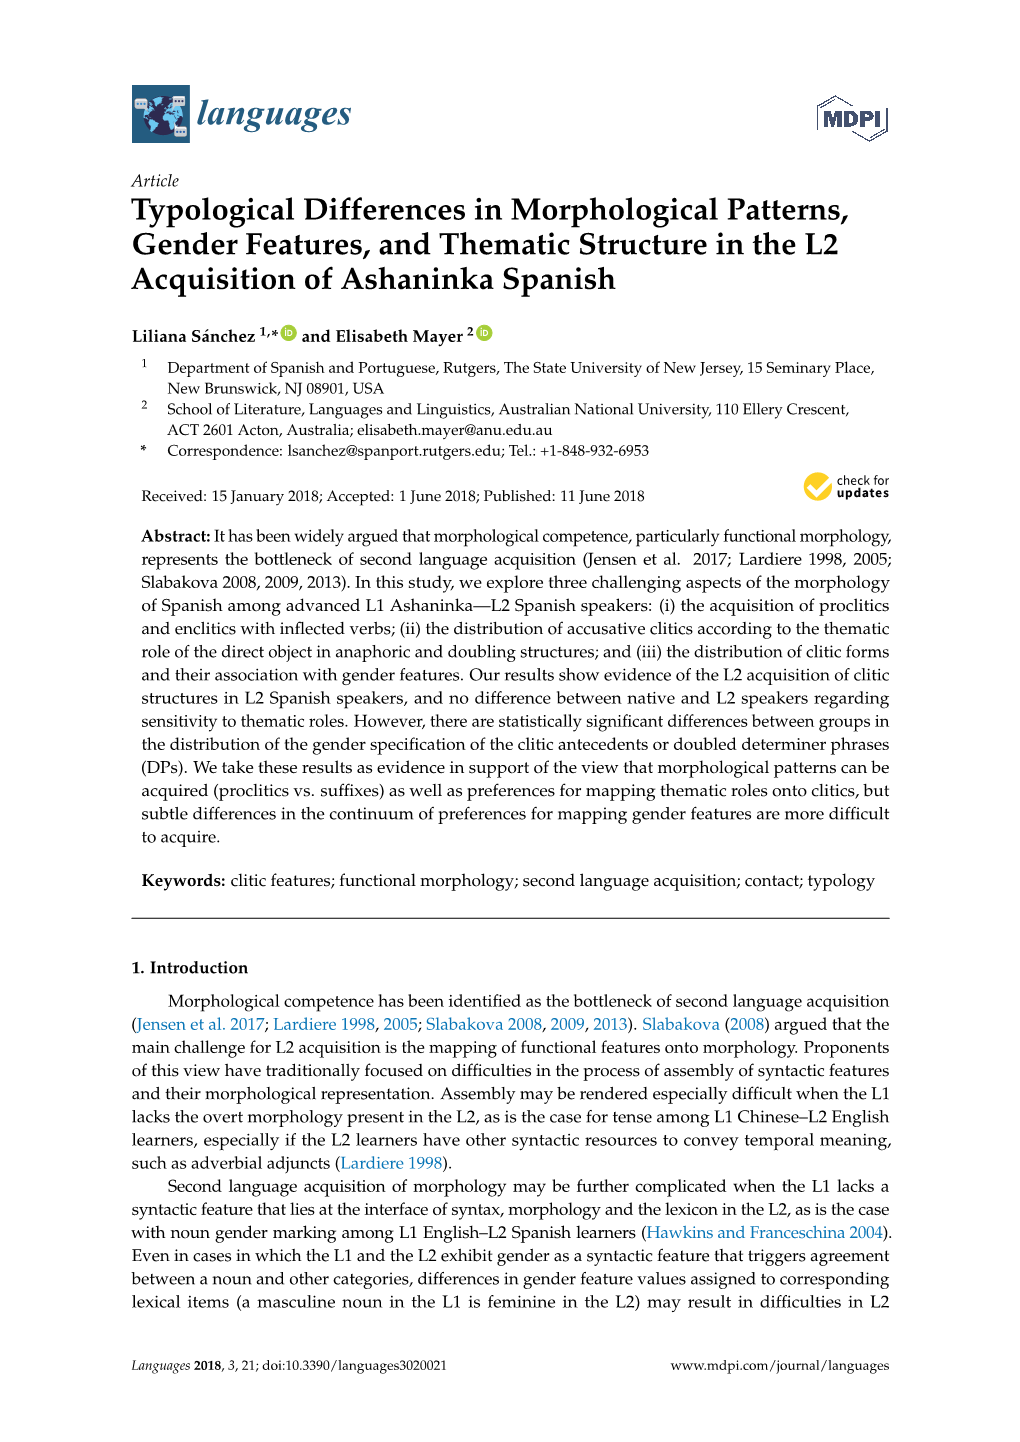 Typological Differences in Morphological Patterns, Gender Features, and Thematic Structure in the L2 Acquisition of Ashaninka Spanish